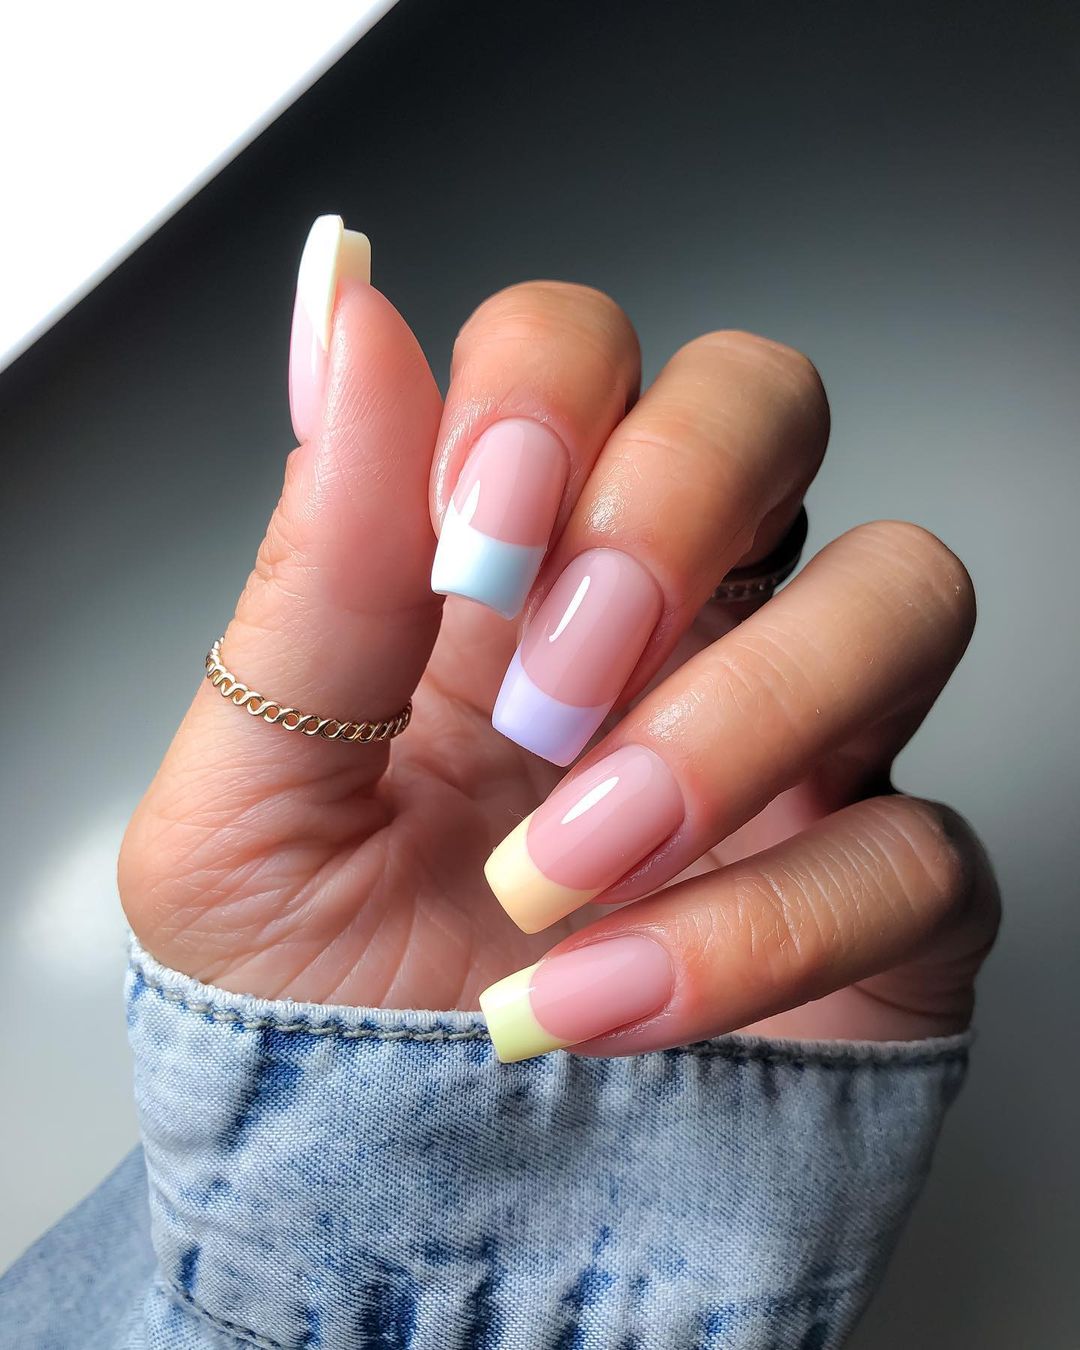 French manicure nail sets